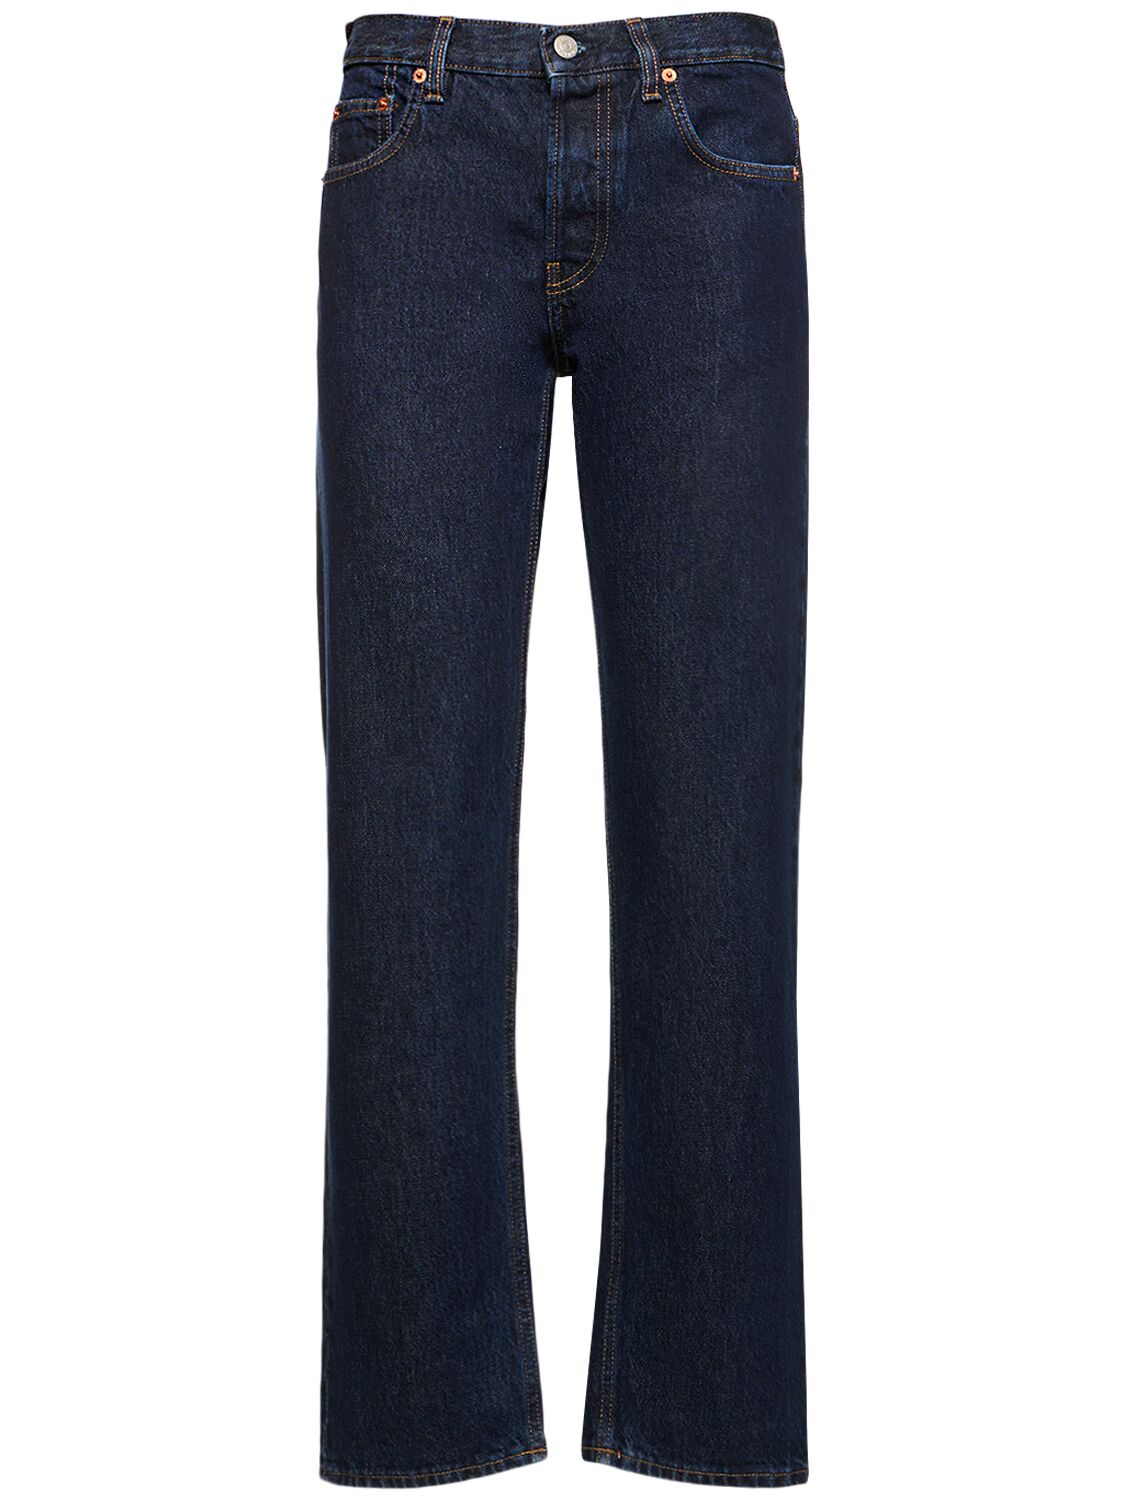 Sporty And Rich Vintage Fit Denim Jeans In Navy